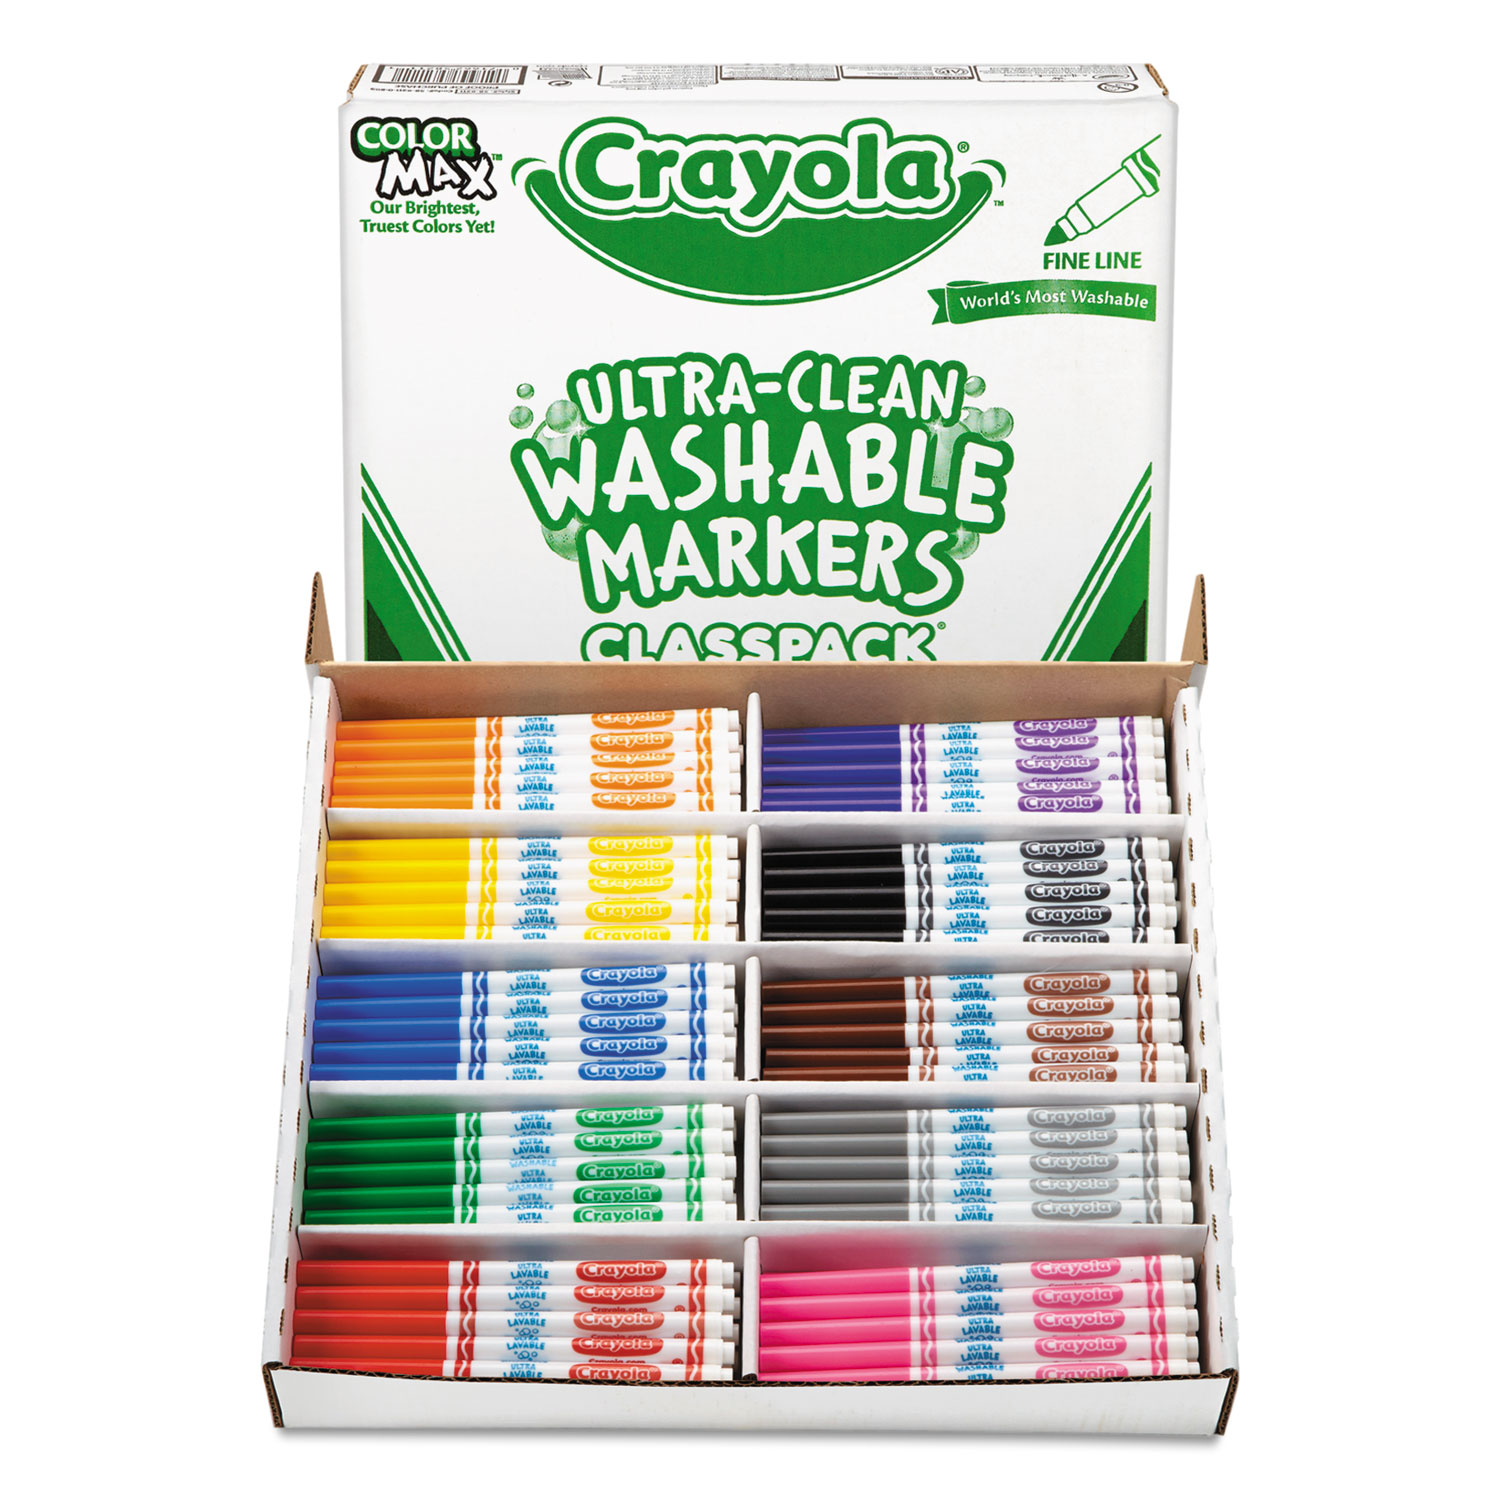 192 Count Ultra-Clean Washable Markers for Kids, Crayola.com